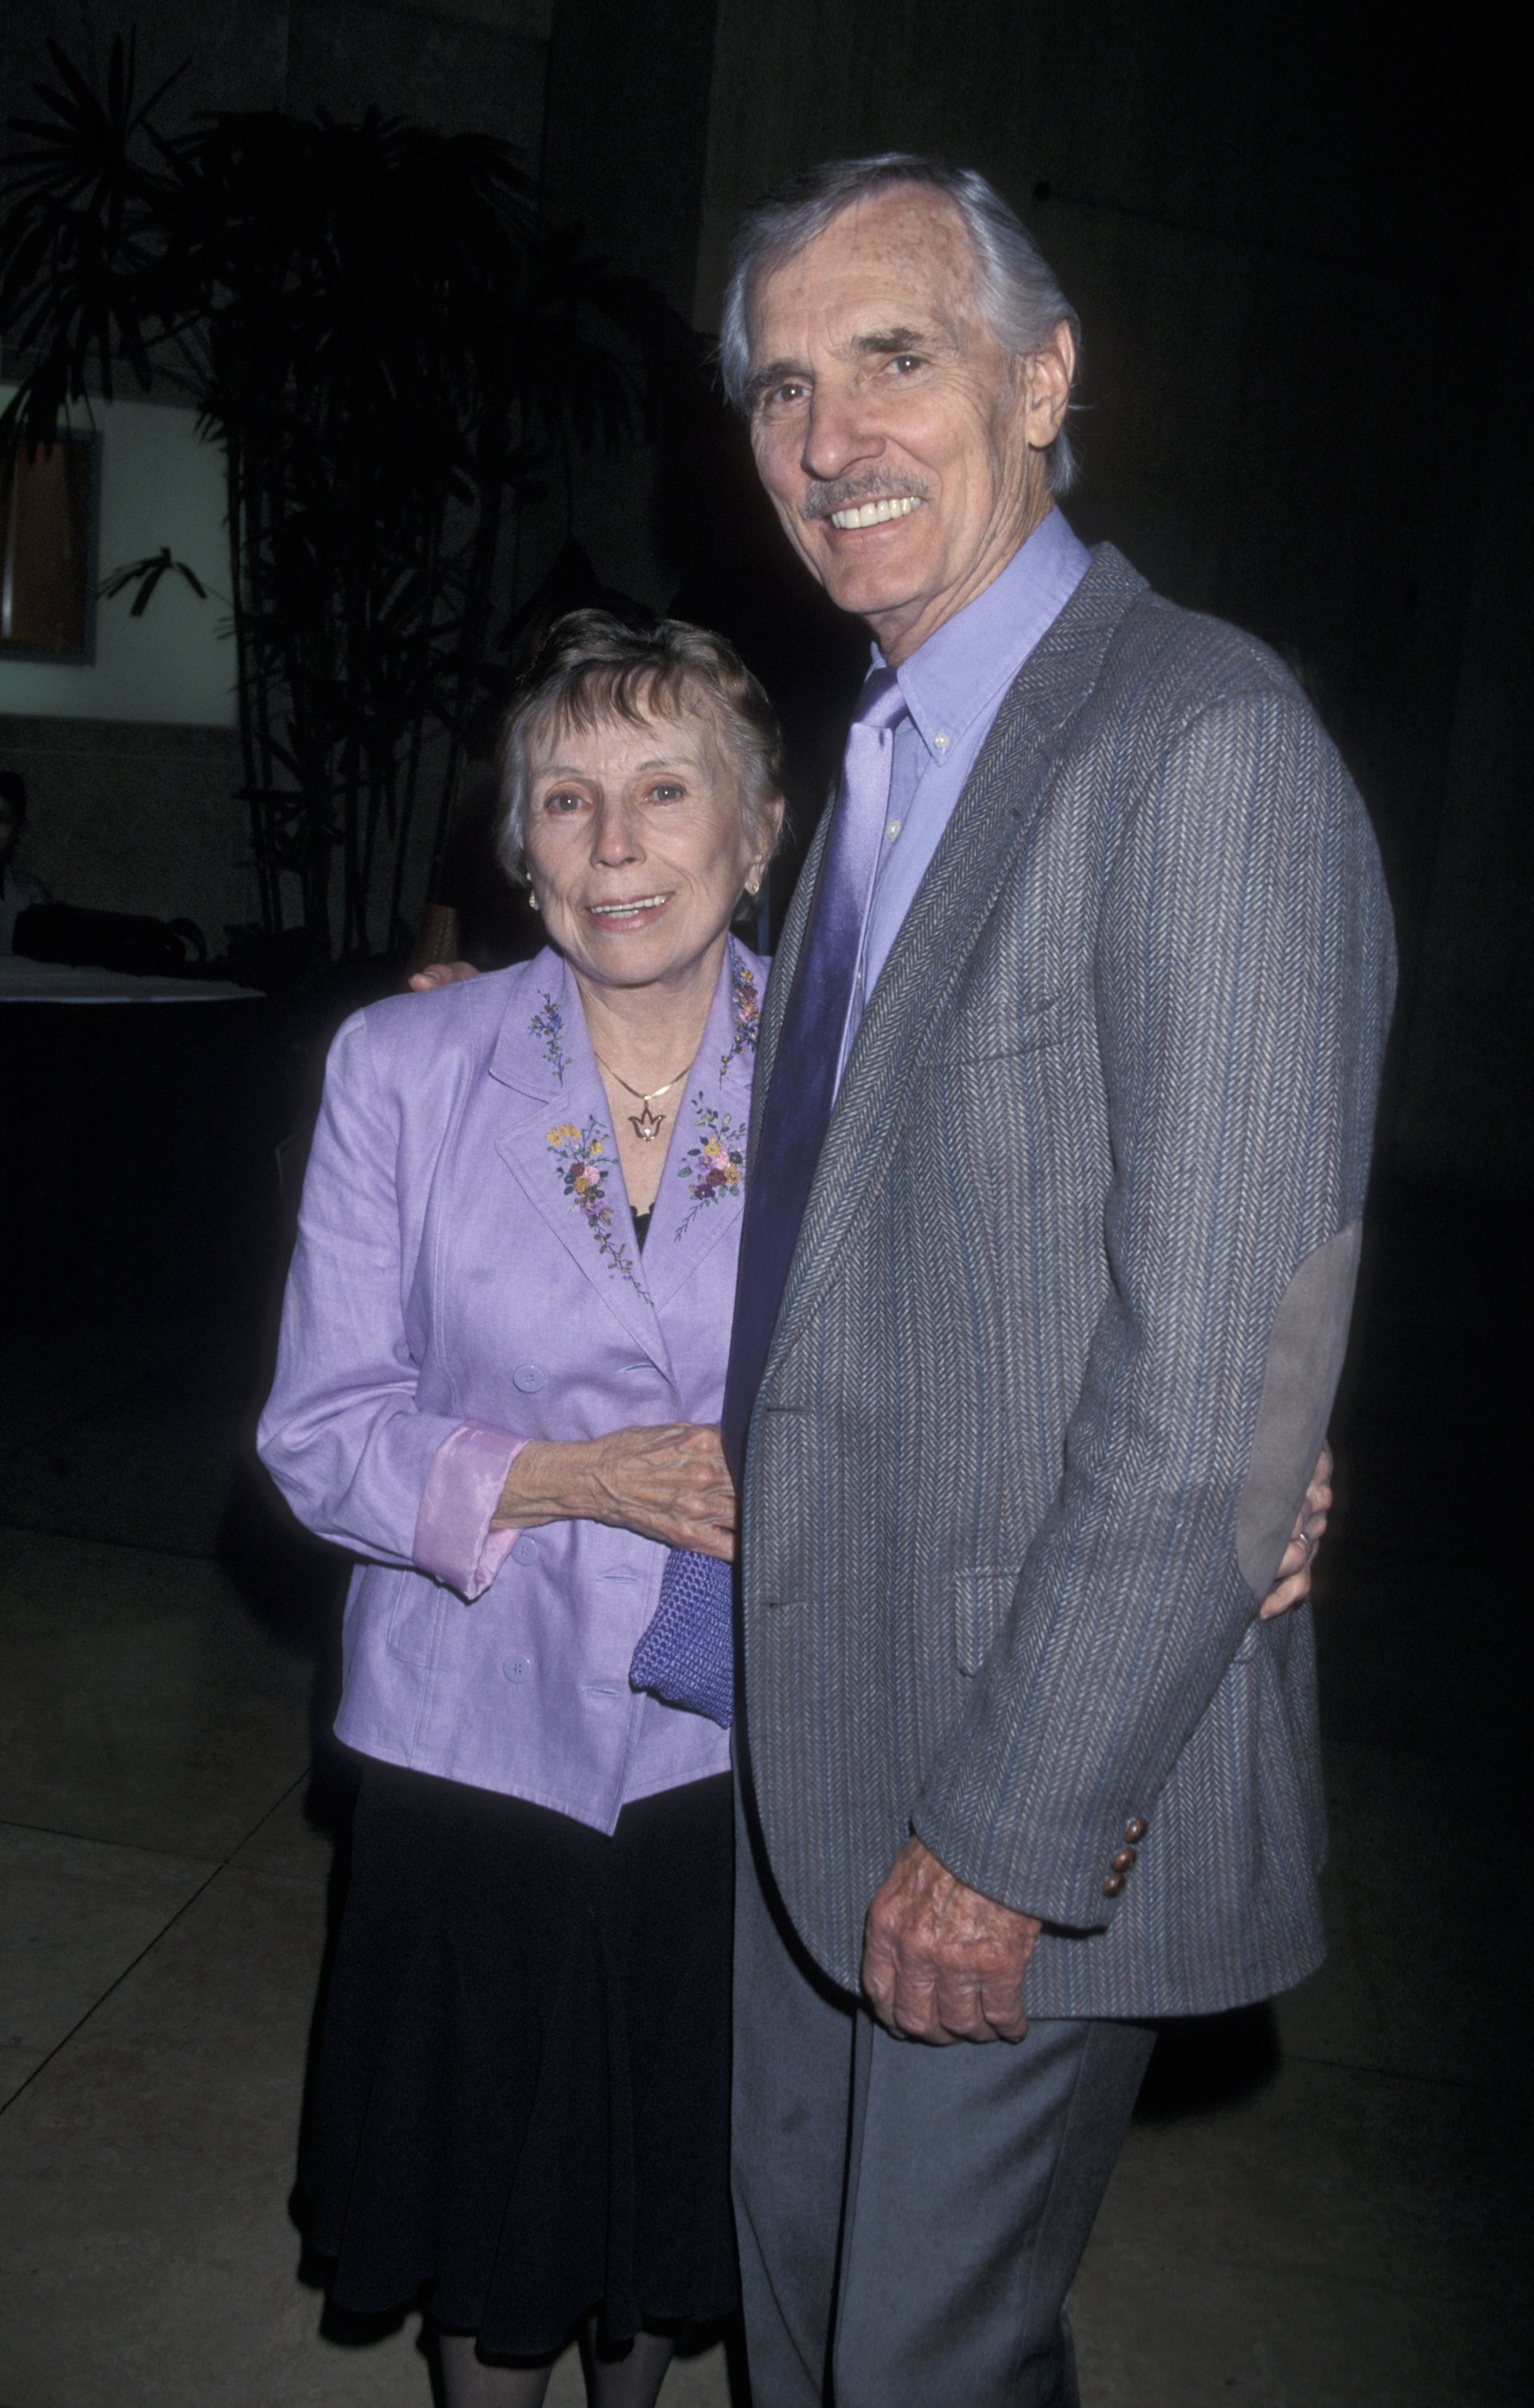 Dennis Weaver and Gerry Stowell during 38th Annual Publicists Guild of America Awards at Beverly Hilton Hotel in Beverly Hills, California. / Source: Getty Images